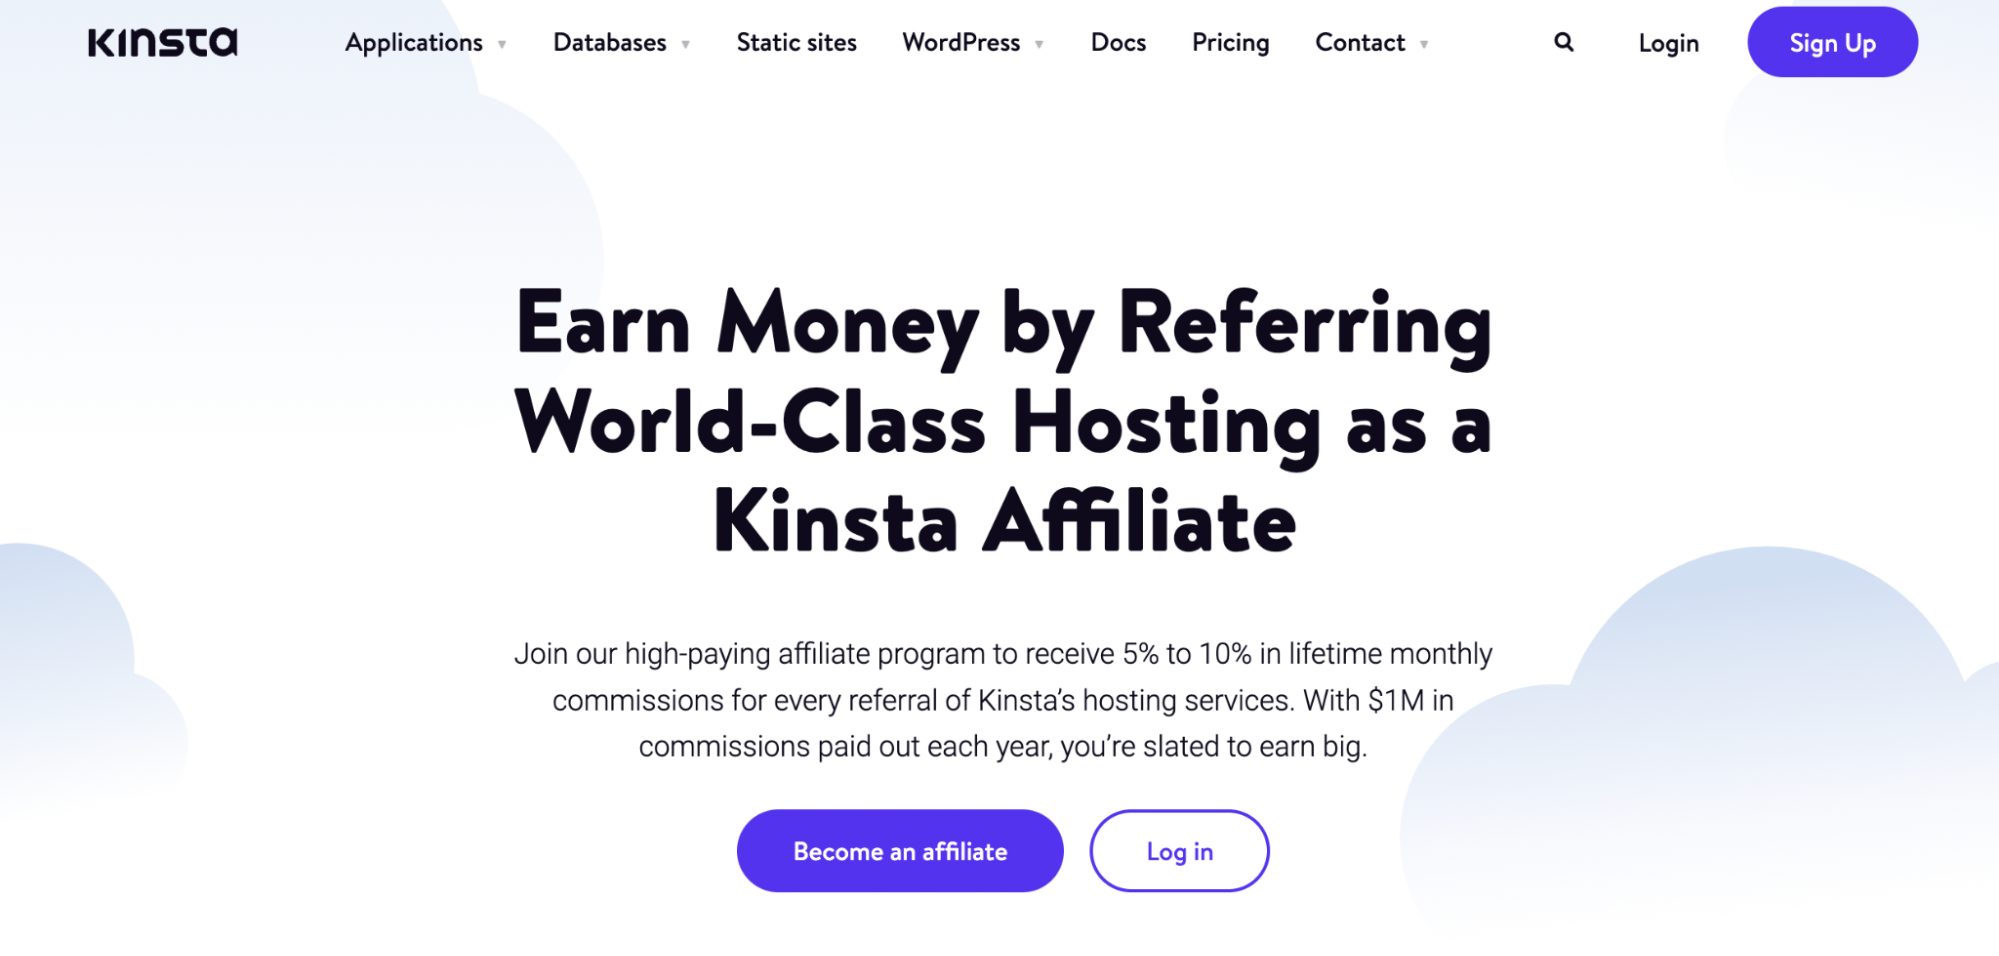 Kinsta offers 5% to 10% in lifetime monthly commissions for every WordPress hosting referral.